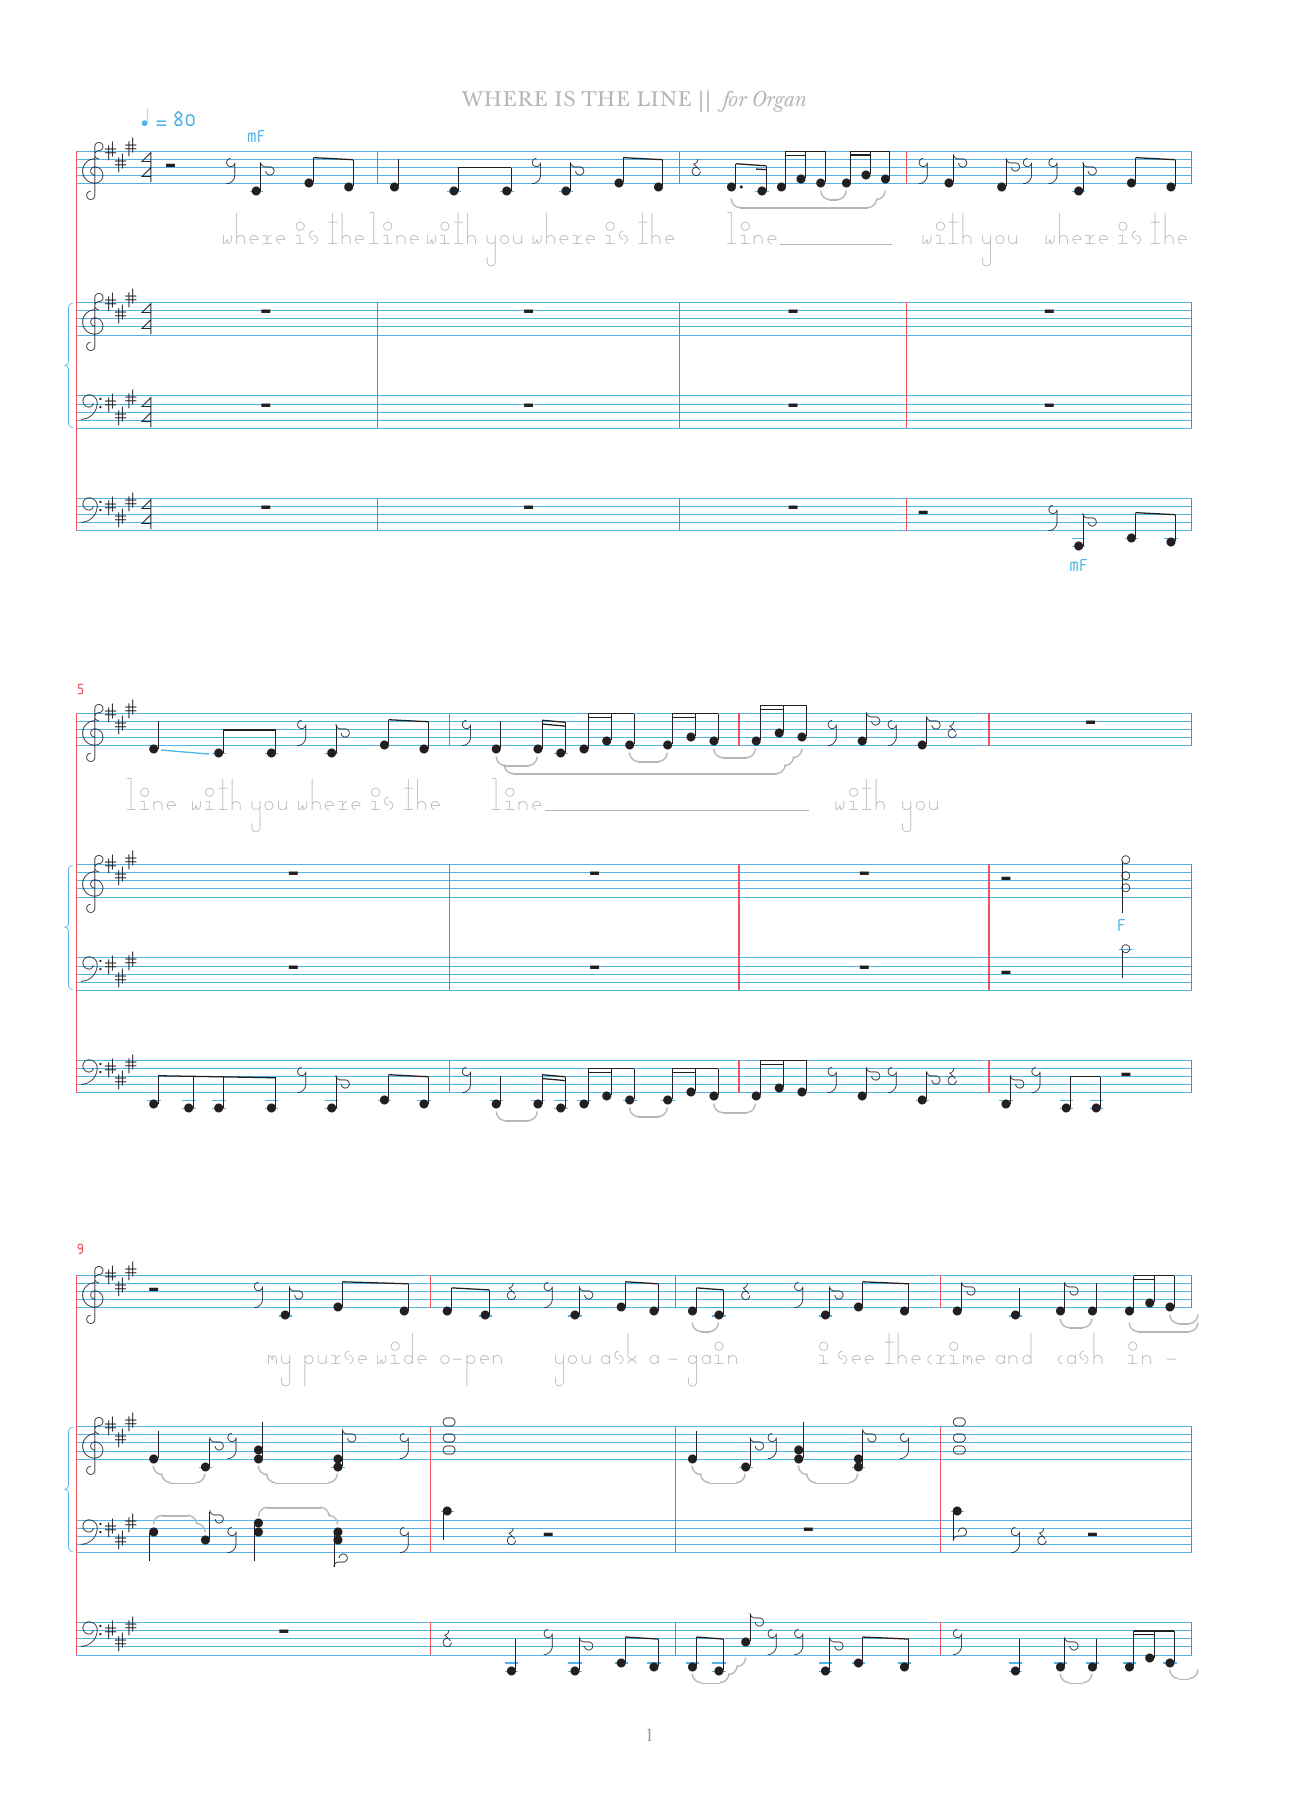 Download Bjork Where Is The Line? Sheet Music